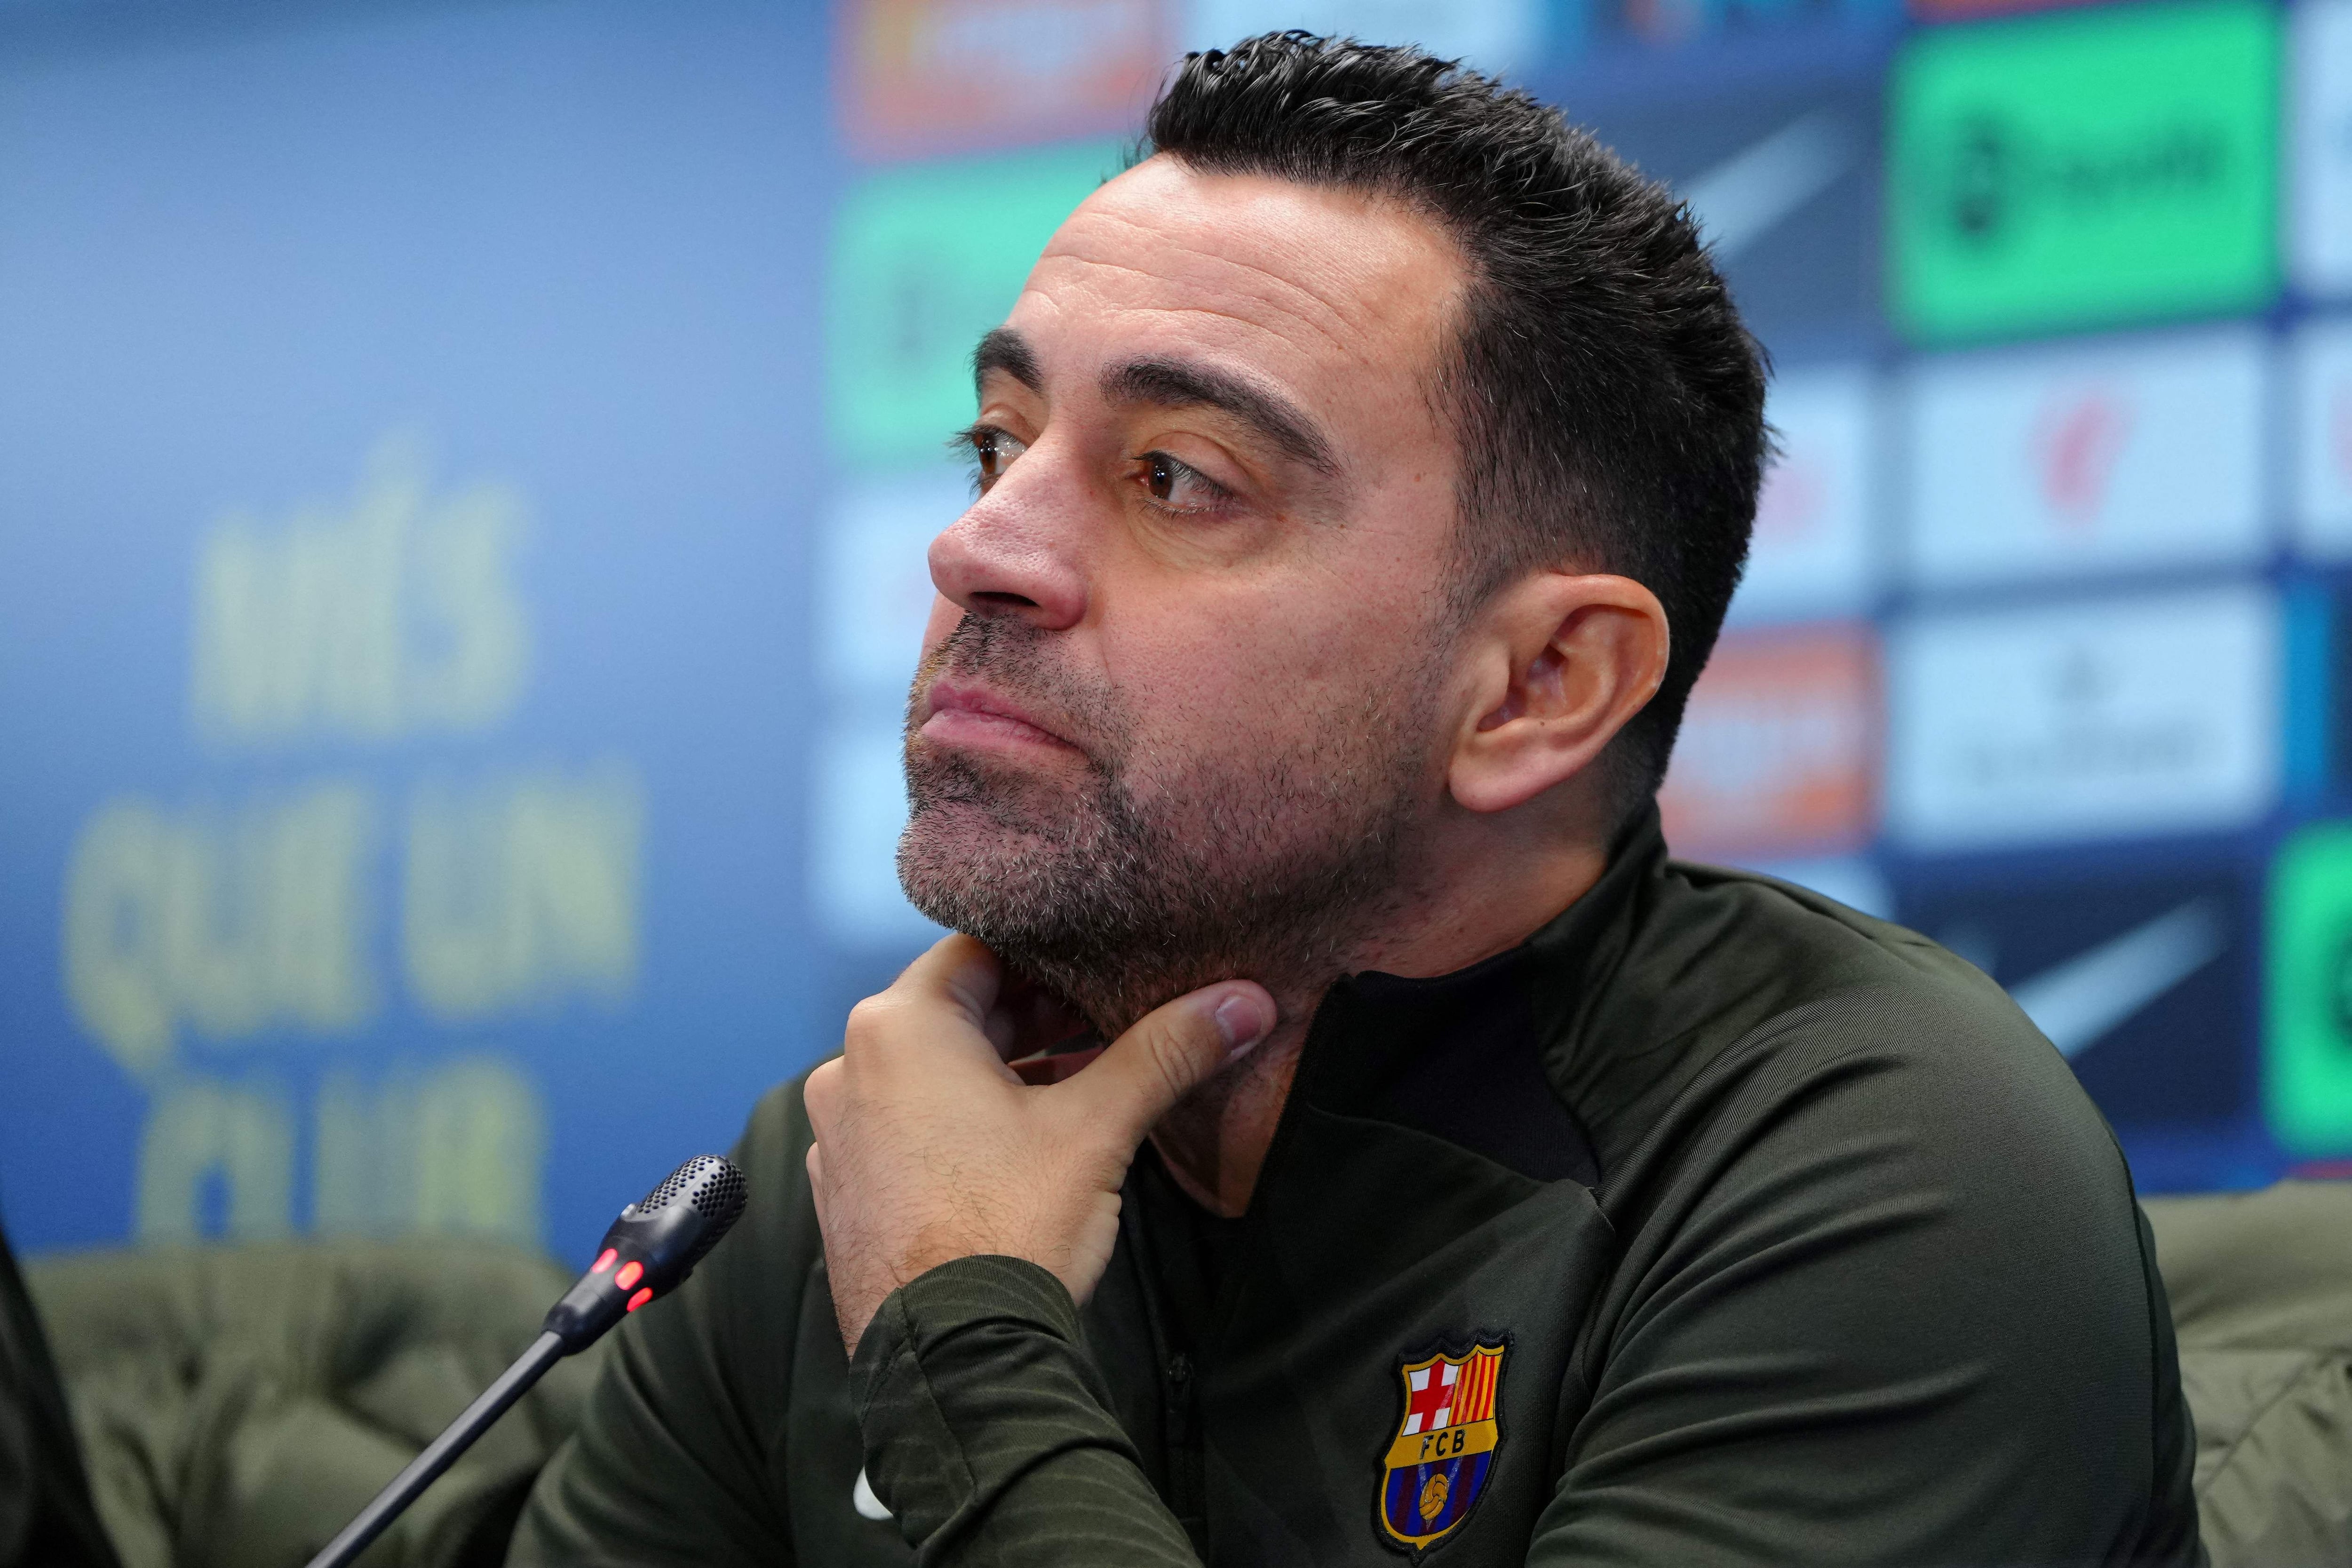 Barcelona's Spanish coach Xavi addresses a press conference at the Joan Gamper training ground in Sant Joan Despi, near Barcelona, on January 30, 2024. Only a few months after lifting the Spanish title, Barcelona coach Xavi Hernandez dramatically announced he would walk away from the club at the end of the season. After Villarreal stunned Barcelona on January 28 with a 5-3 win which left the champions third, and 10 points behind La Liga leaders Real Madrid, Xavi said he was stepping down in June. (Photo by PAU BARRENA / AFP)